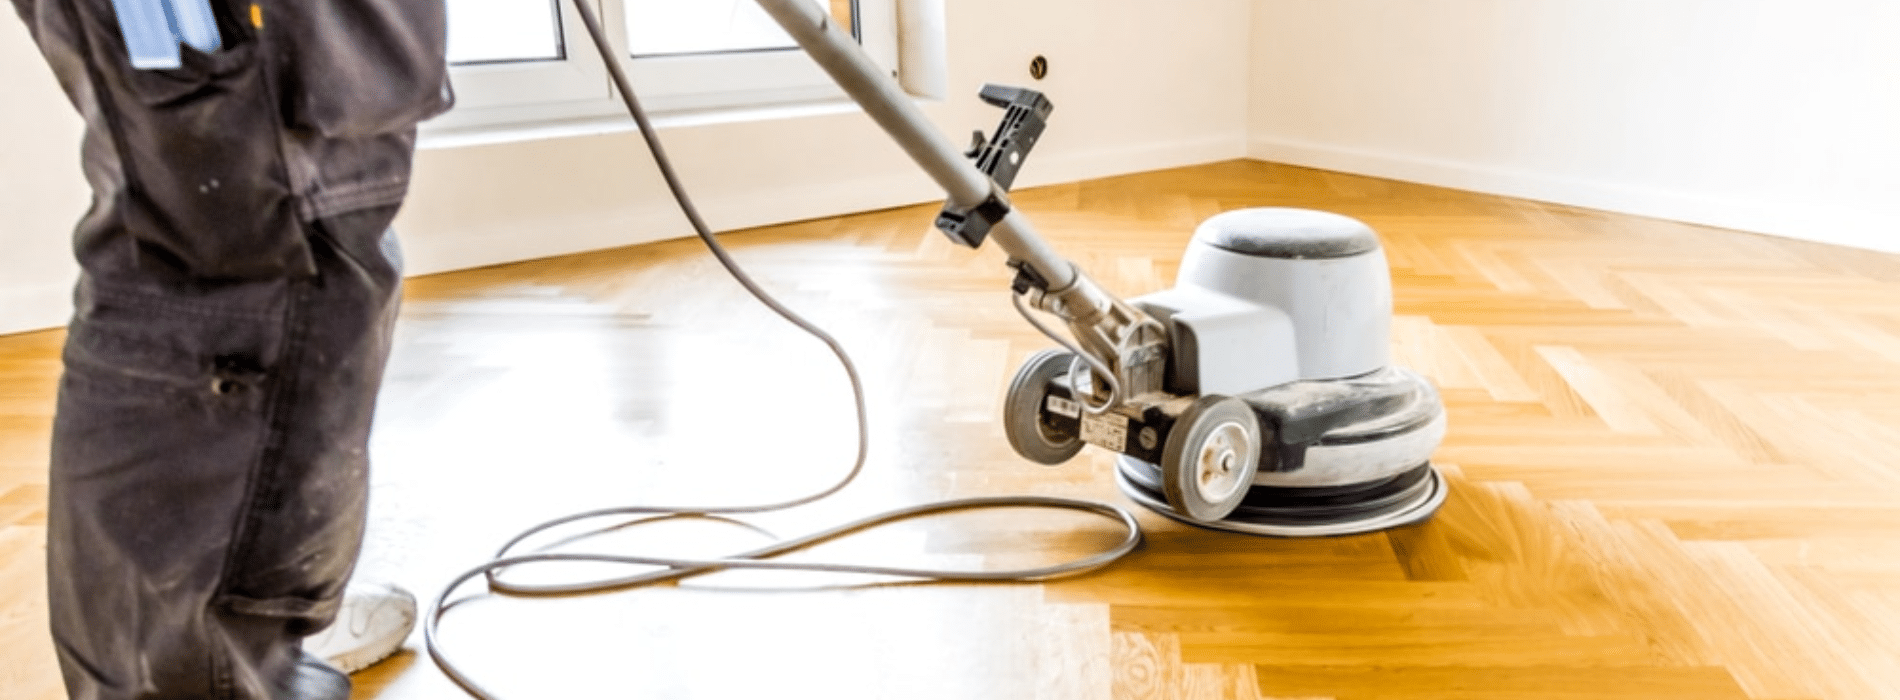 Experience the expertise of Mr Sander® as they skillfully sand a herringbone floor using the powerful 250x750 mm Bona belt sander. With an impressive 2200 effect, operating at 230V and a frequency of 50/60 Hz, this professional-grade equipment ensures a clean and efficient result. Trust the experts for flawless floor sanding.